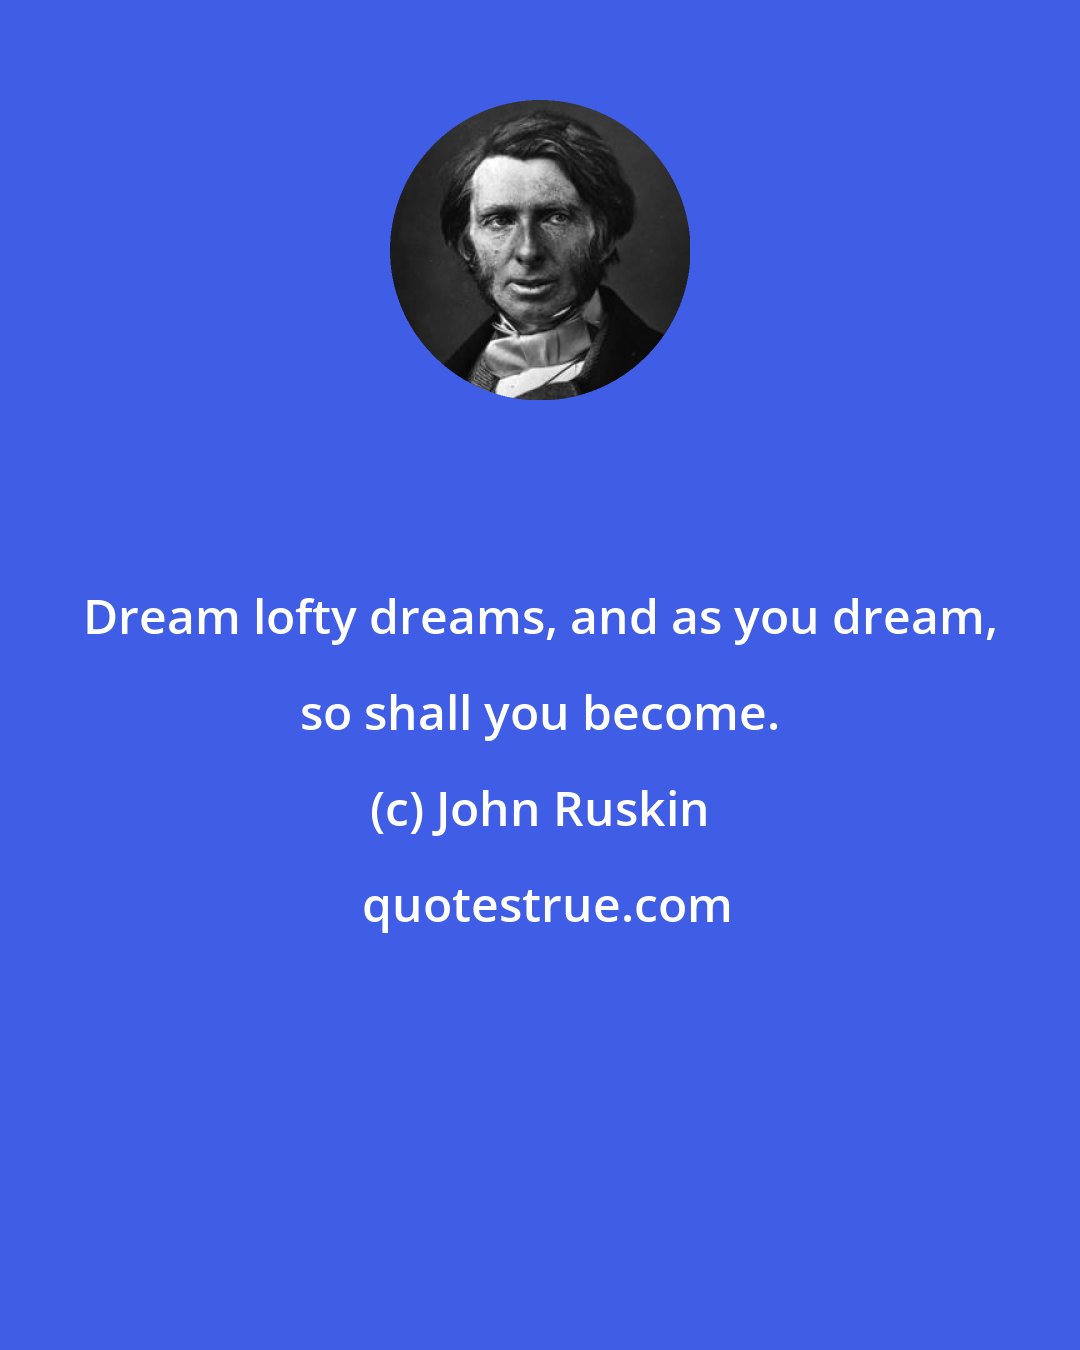 John Ruskin: Dream lofty dreams, and as you dream, so shall you become.